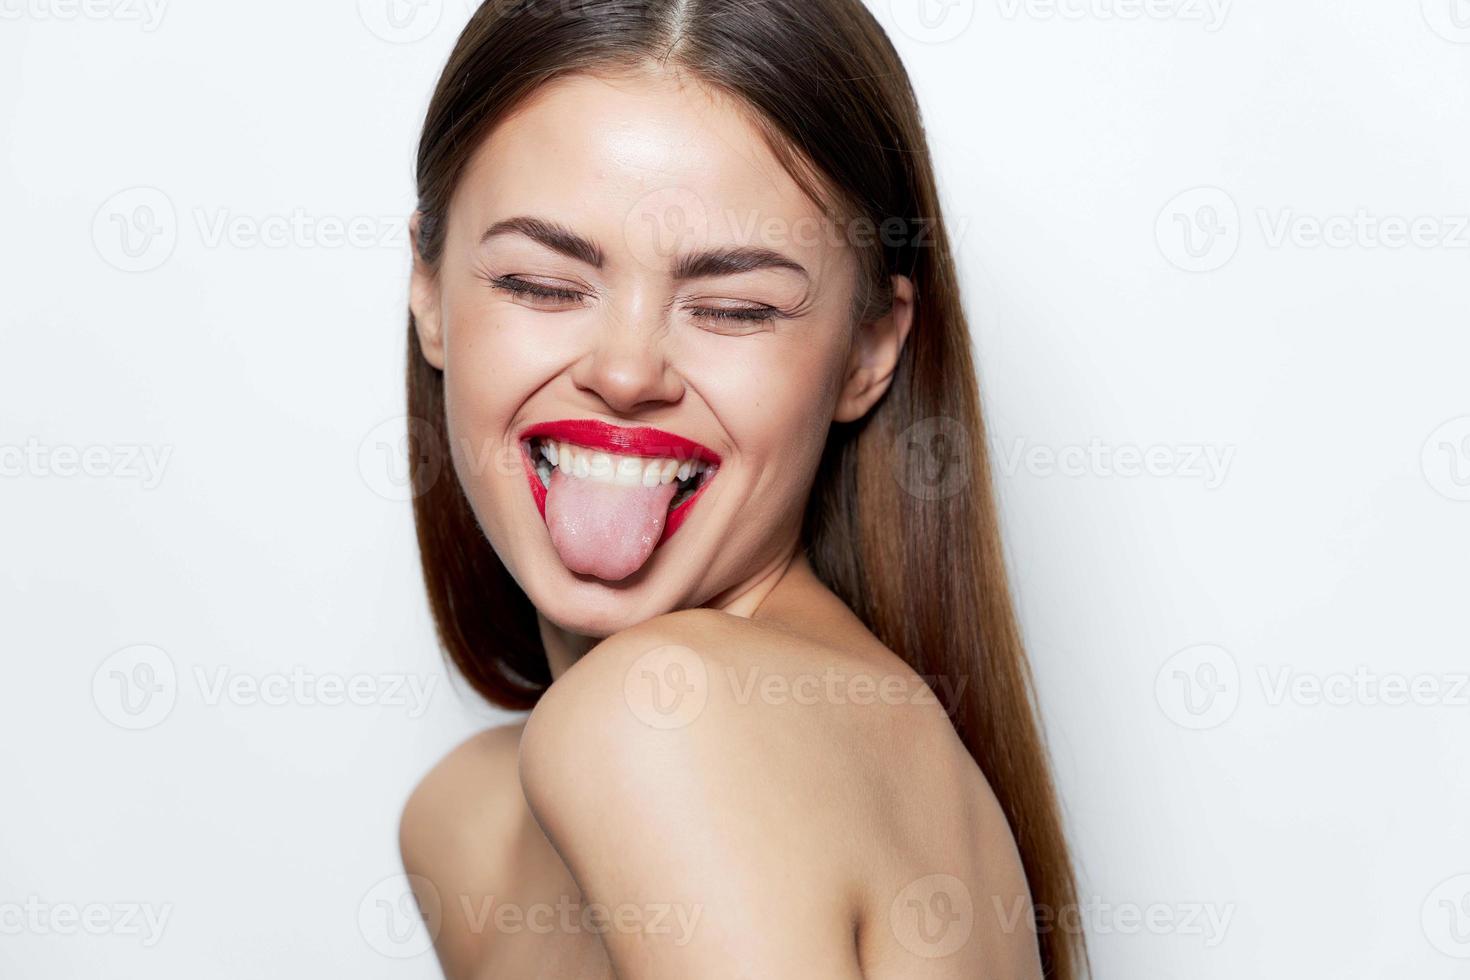 Woman portrait Naked shoulders gaiety closed eyes showing tongue bare shoulders photo